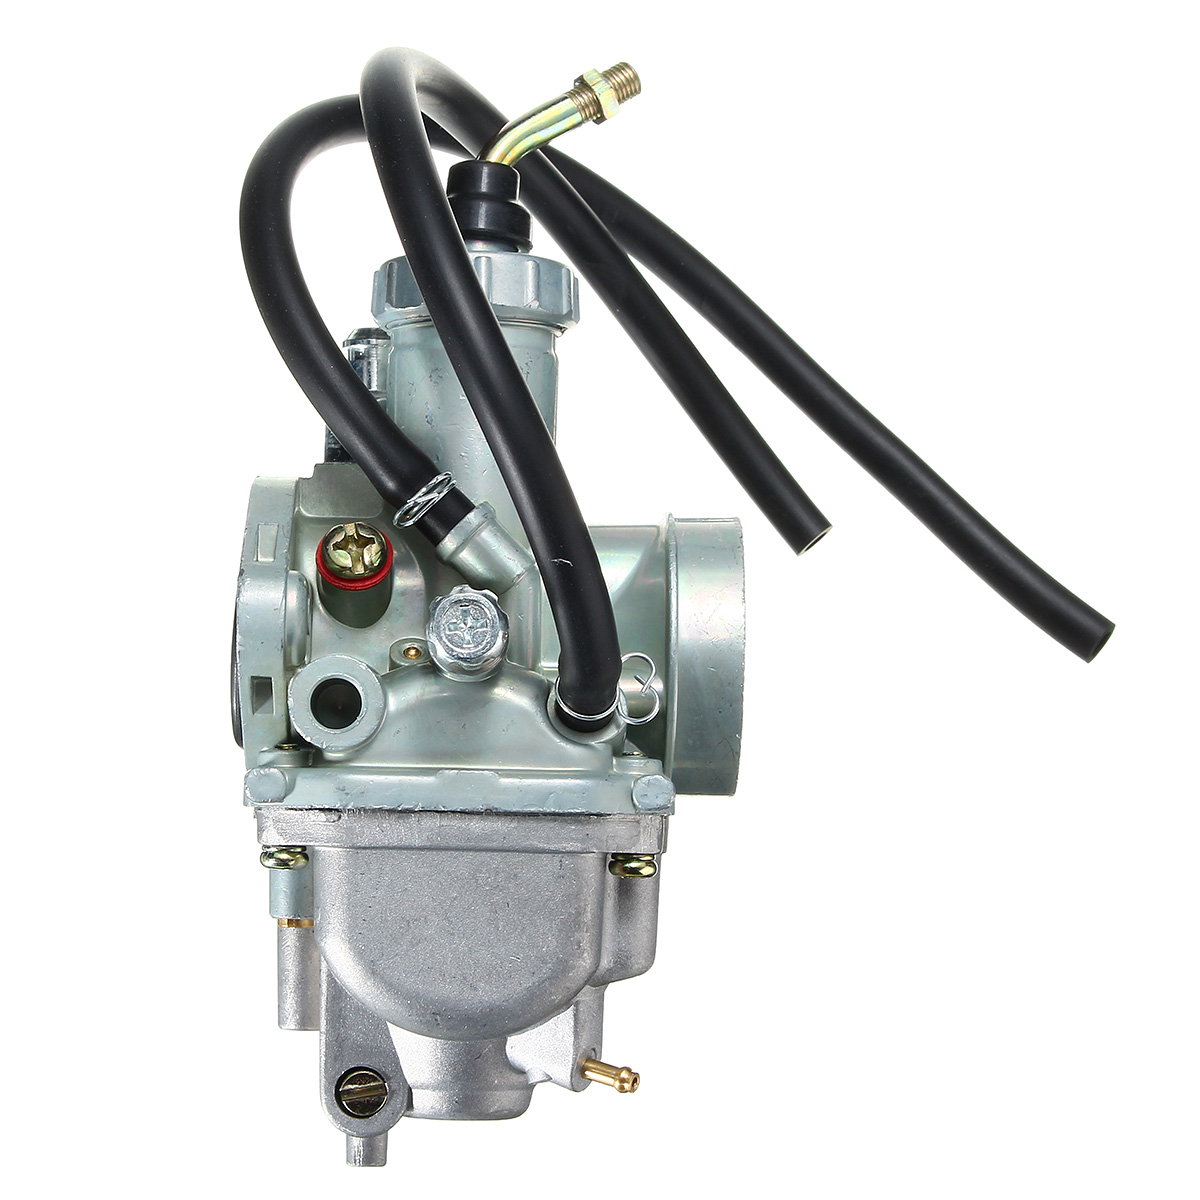 Carburetor Carb Replace for YAMAHA Breeze YFA125 YFA Carby 1989-2004 Direct Fit - Auto GoShop